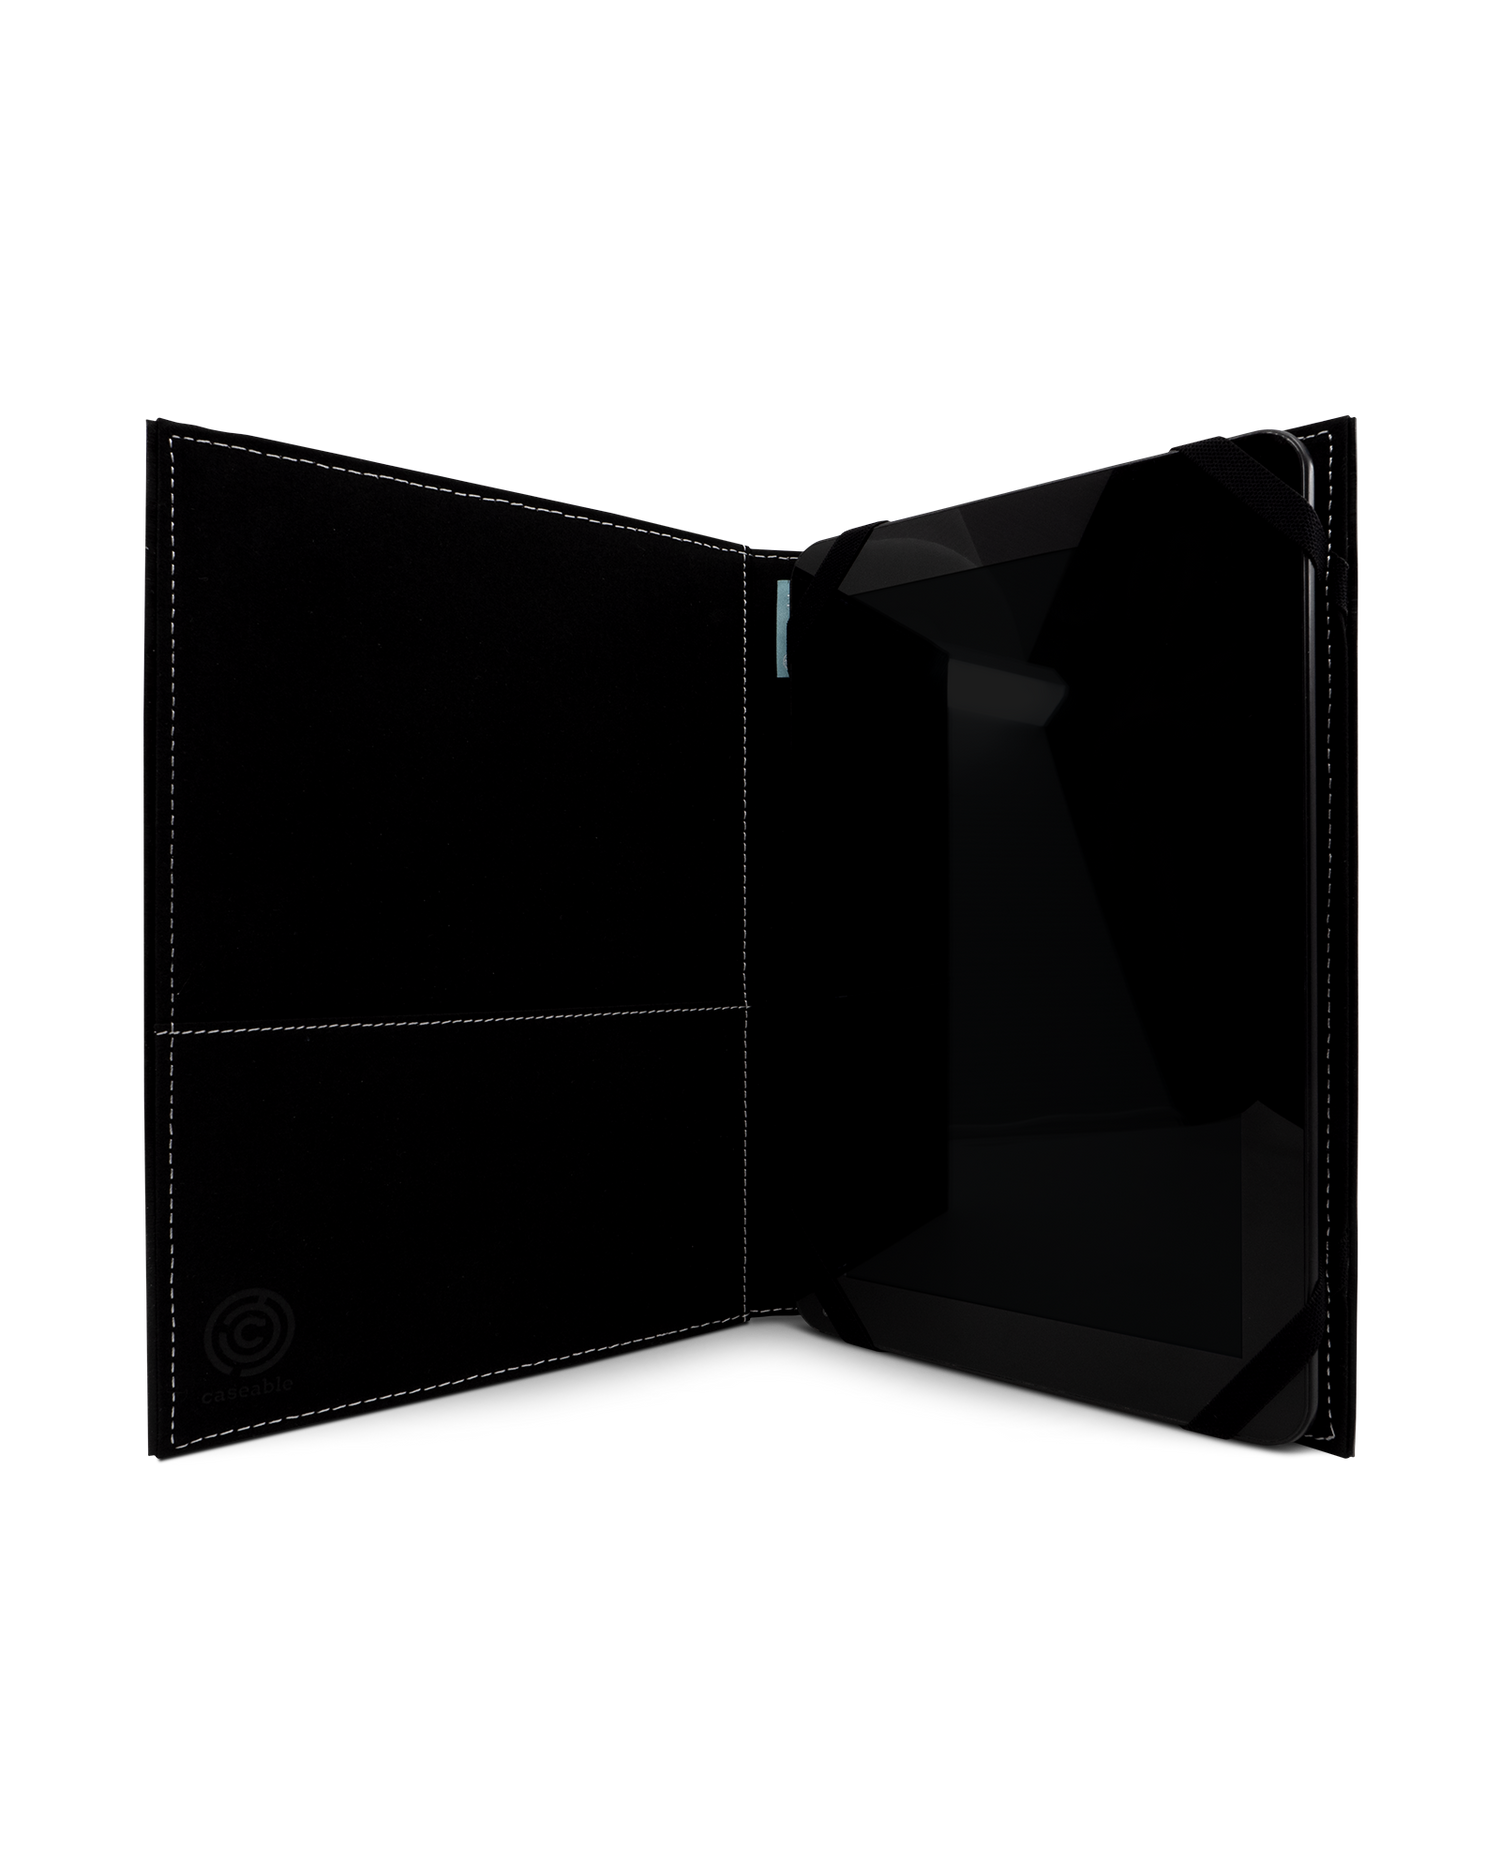 ISG Black Tablet Case M: Opened interior view